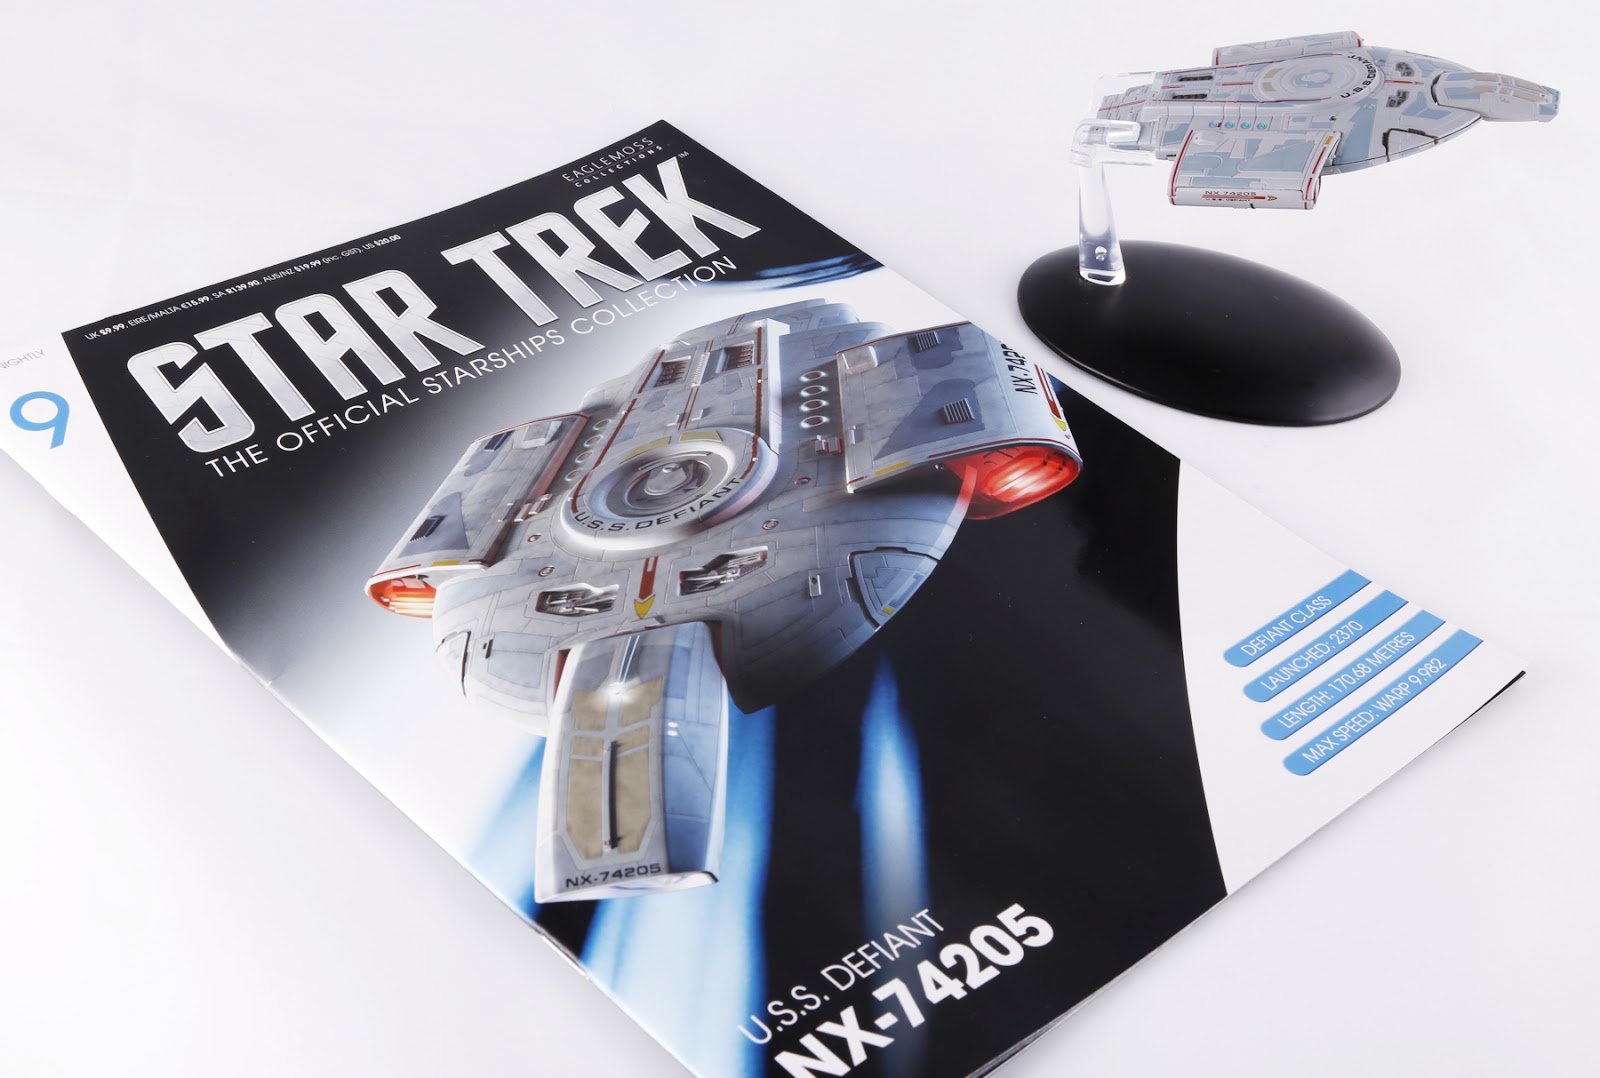 Star Trek USS Defiant NX-74205 with Collectible Magazine #9 by Eaglemoss 